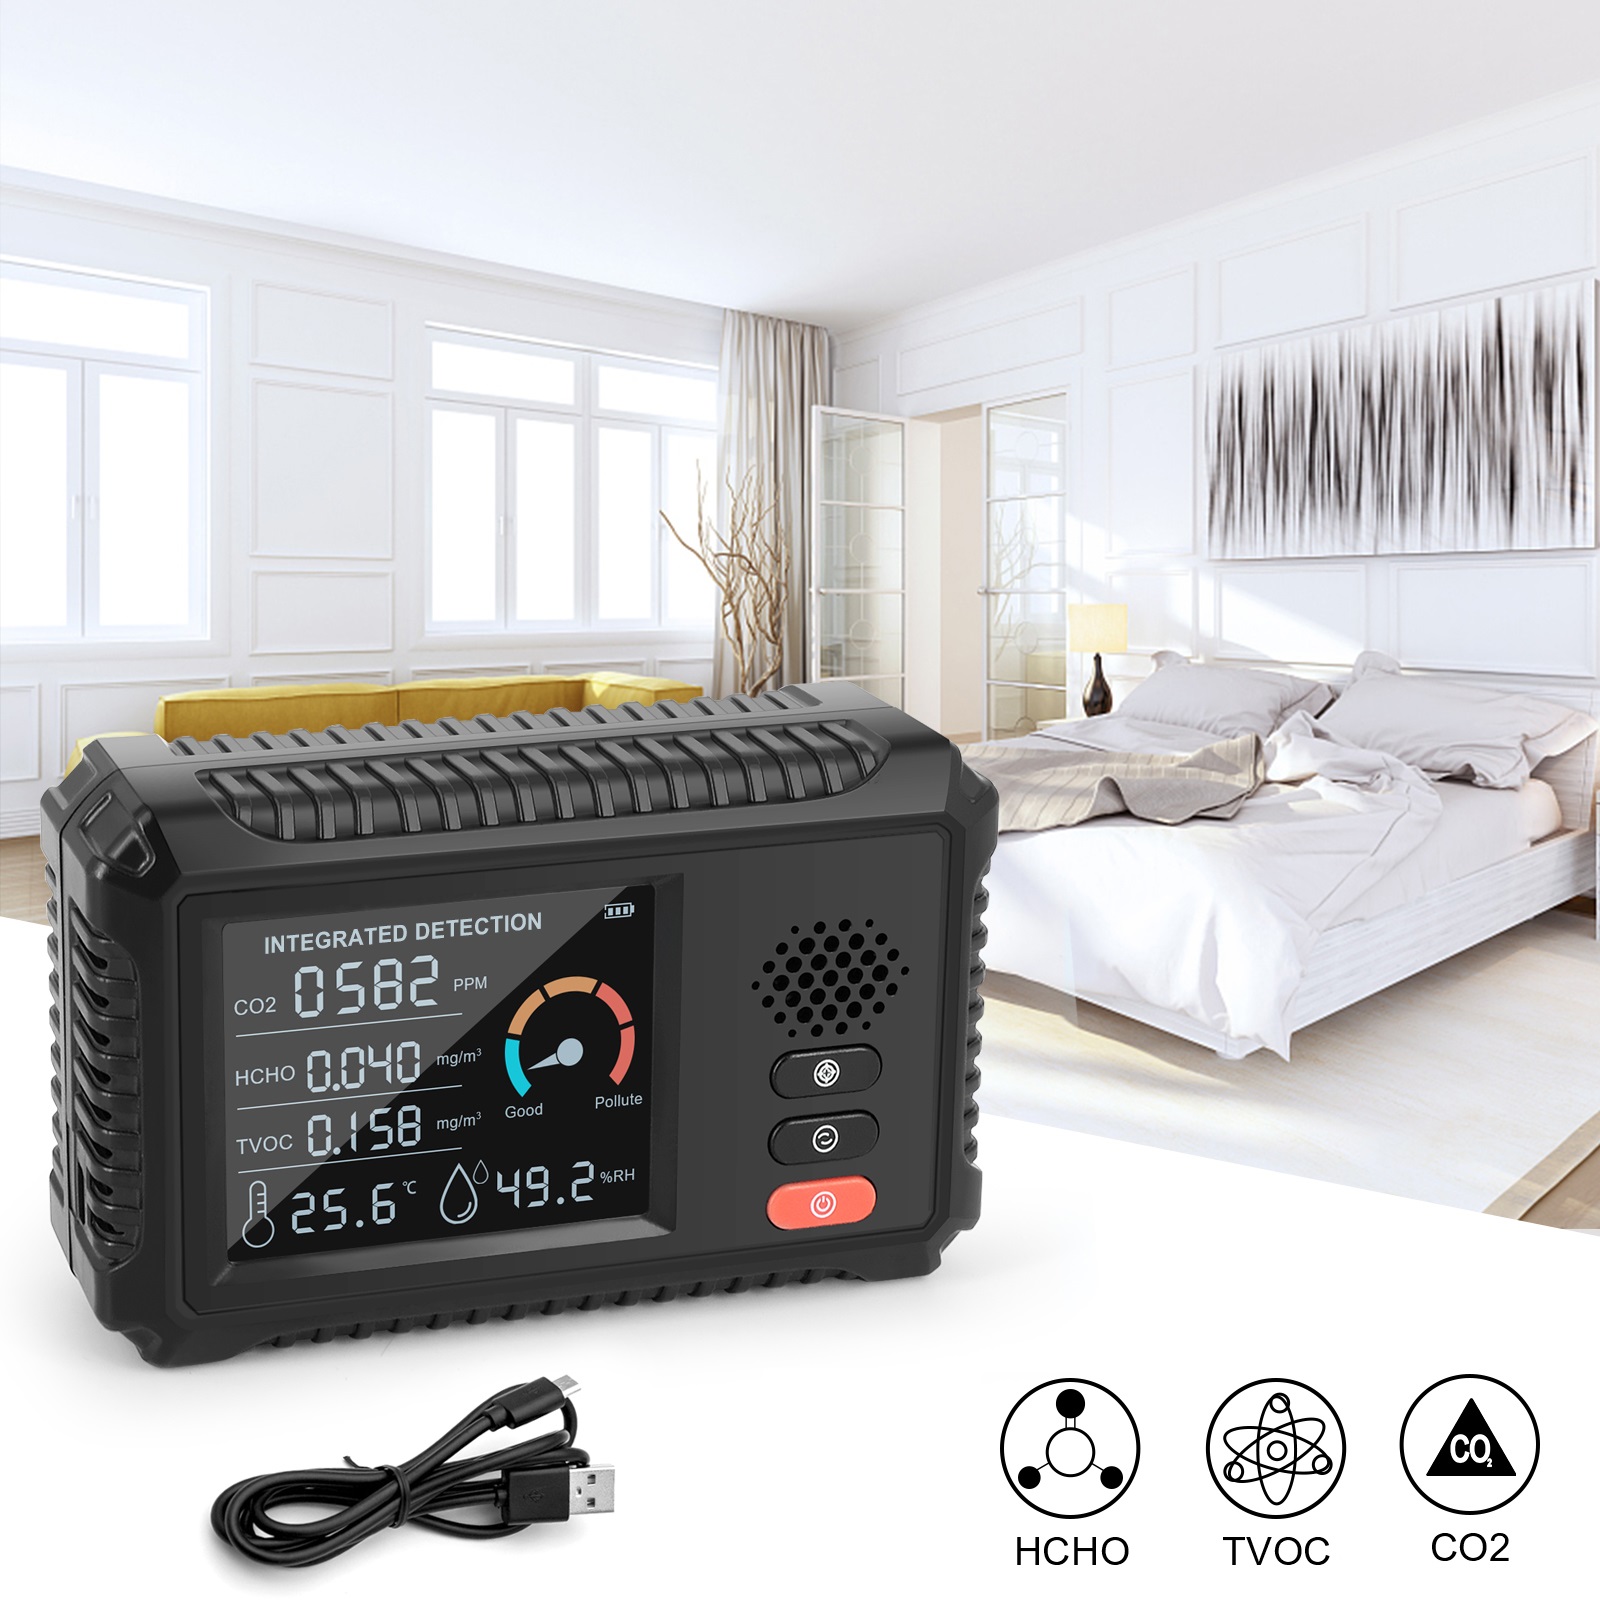 5-In-1-Portable-CO2HCHOTVOC-Detector-Air-Quality-Monitor-Temperature-and-Humidity-Sensor-Carbon-Diox-1916485-1